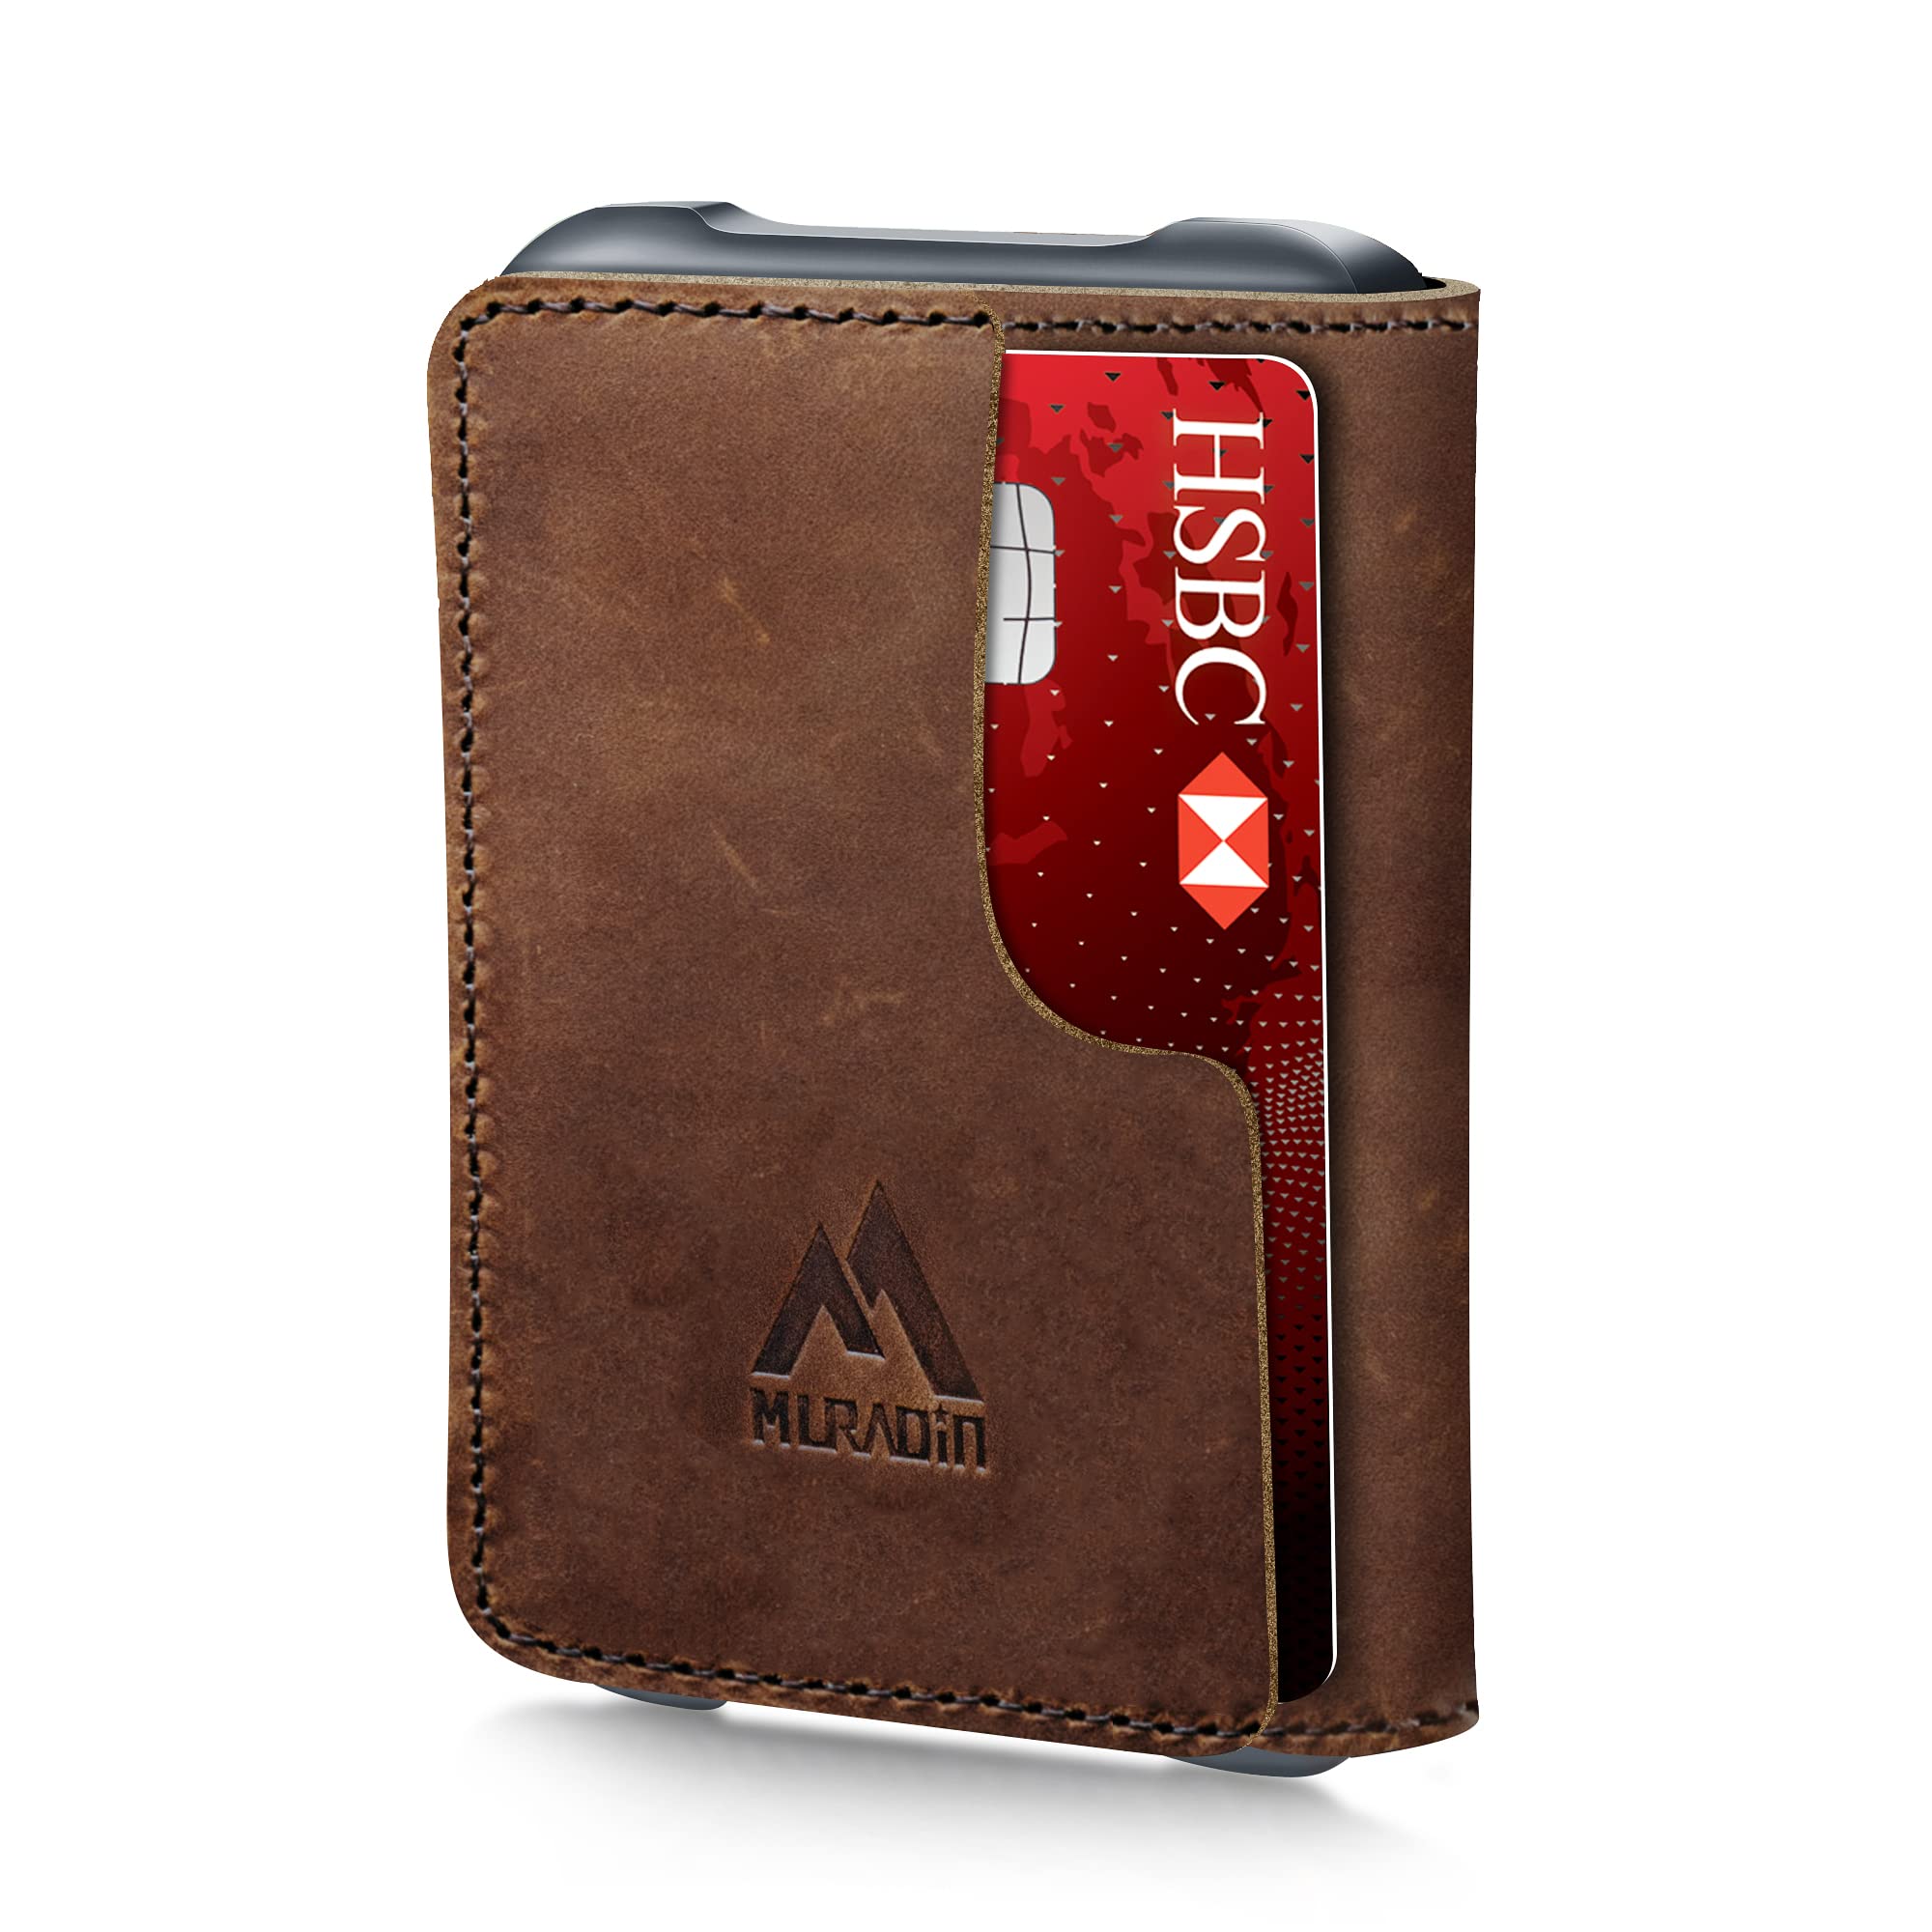 Buy Mens Bifold Leather Wallets At an Exceptional Price - Arad Branding